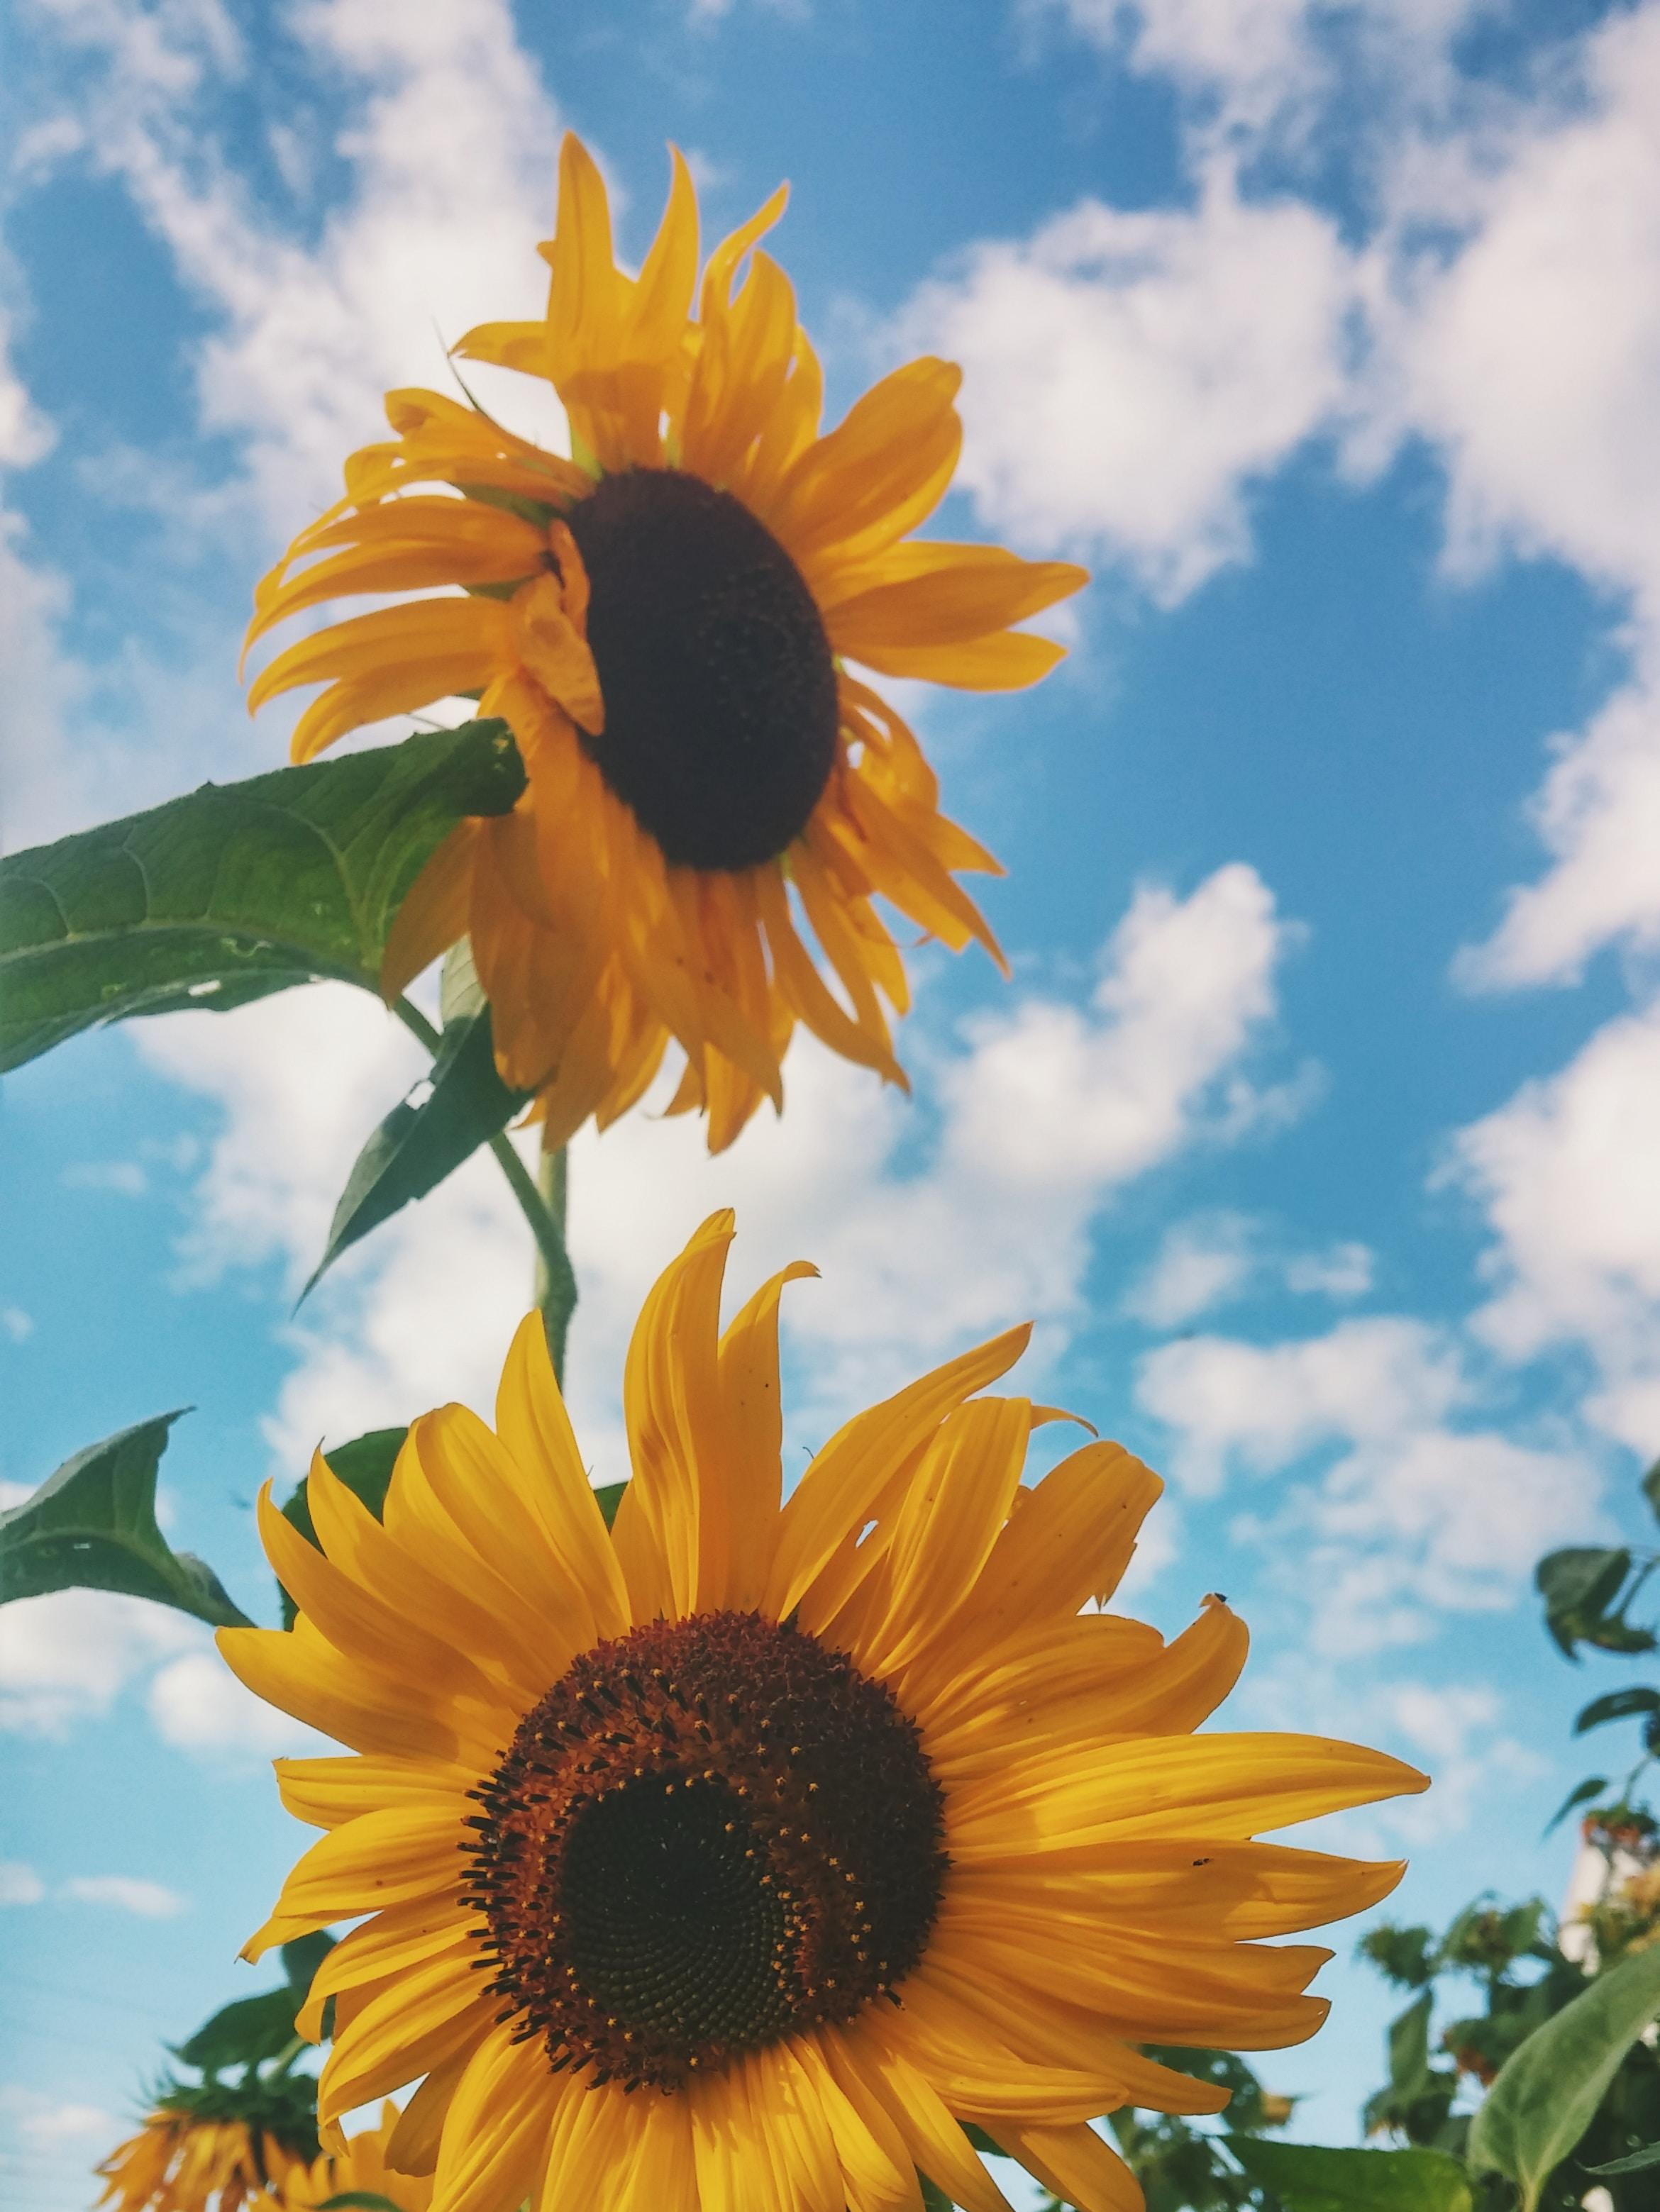 15 Excellent Sunflower Aesthetic Wallpaper Desktop You Can Use It At No